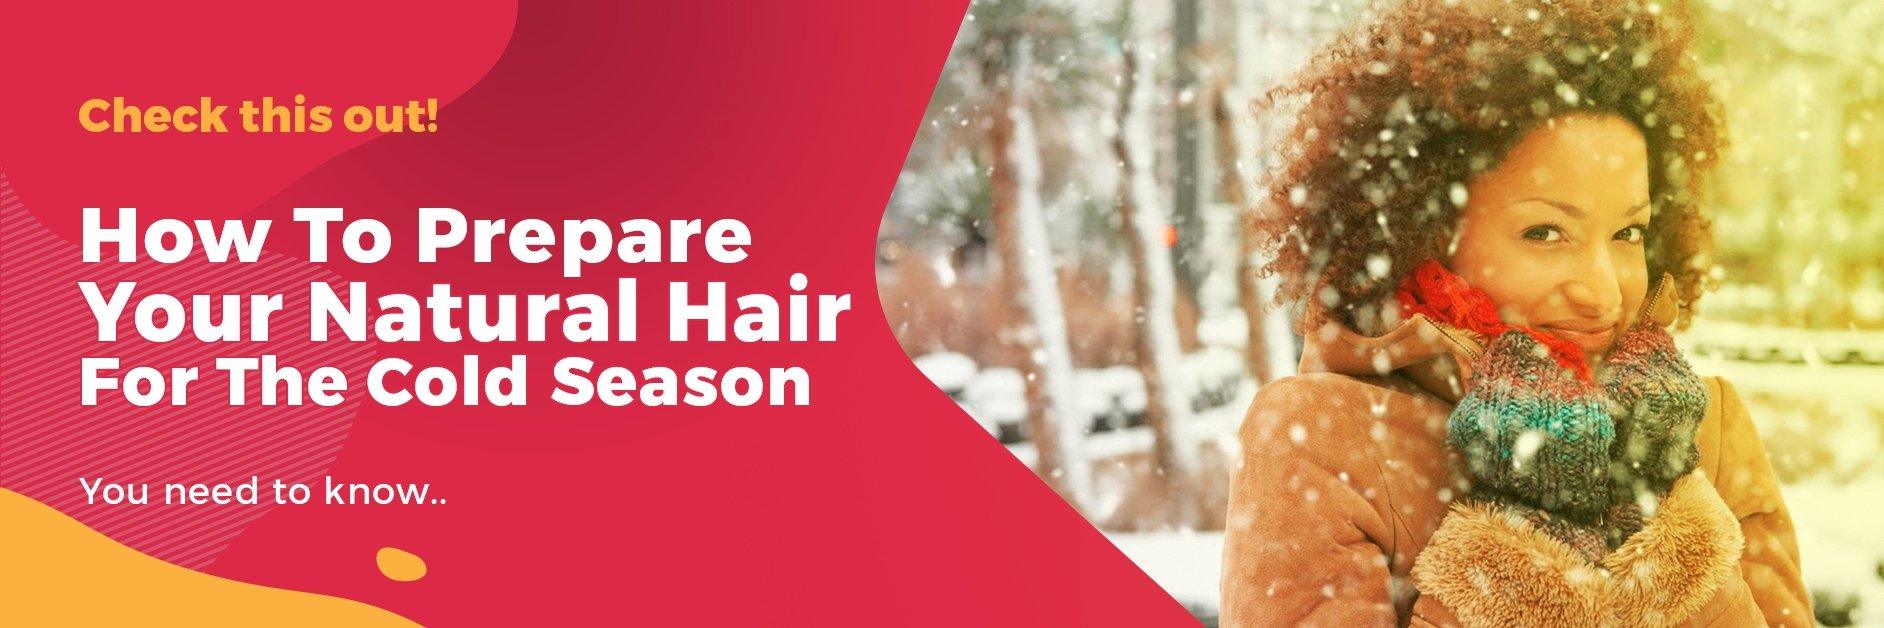 How to Prepare your Natural Hair for the Cold Season - GlammedNaturallyOil